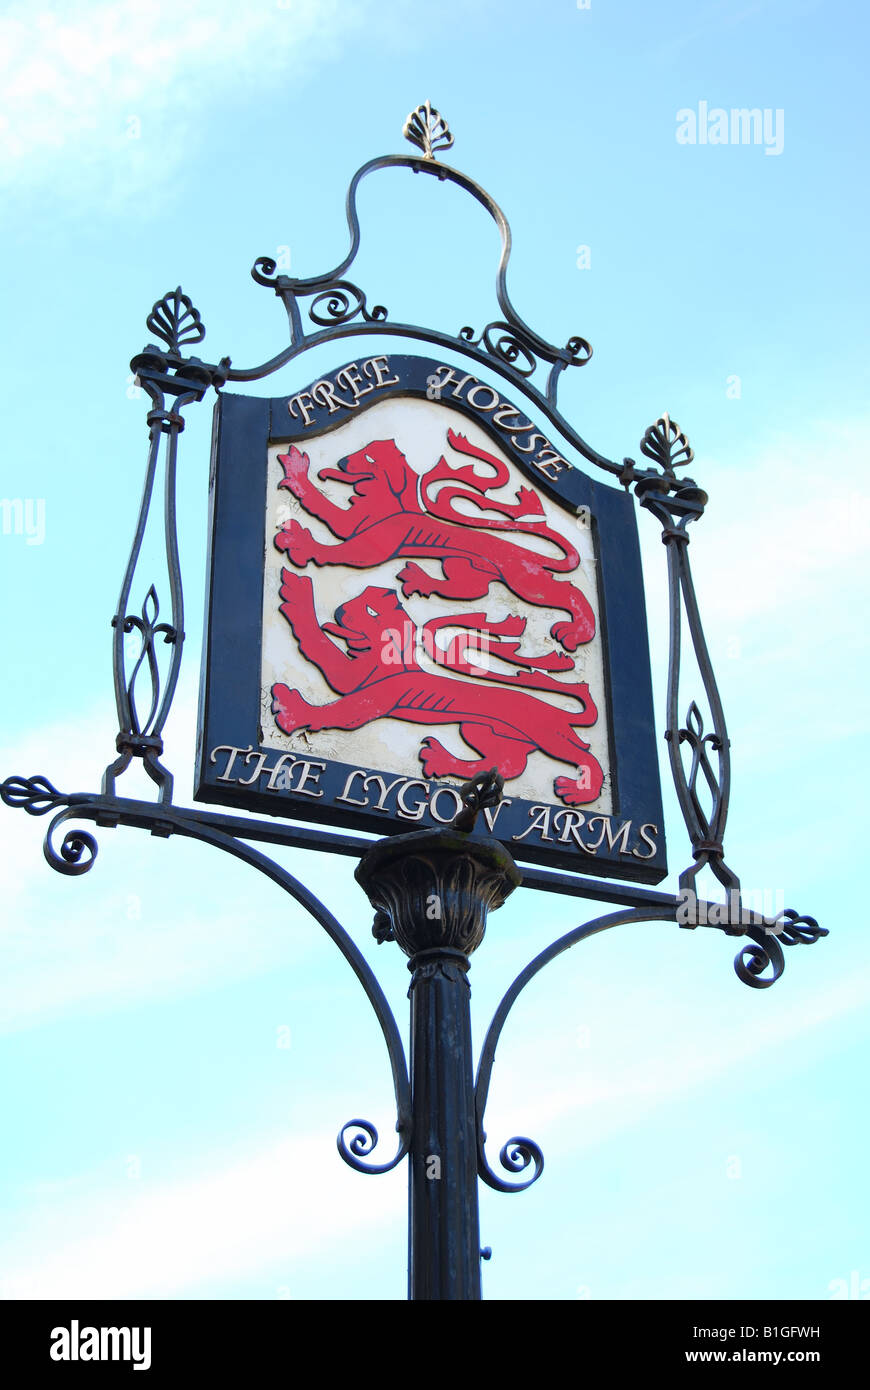 The 16th Century Lygon Arms sign, High Street, Chipping Campden, Cotswolds, Gloucestershire, England, United Kingdom Stock Photo